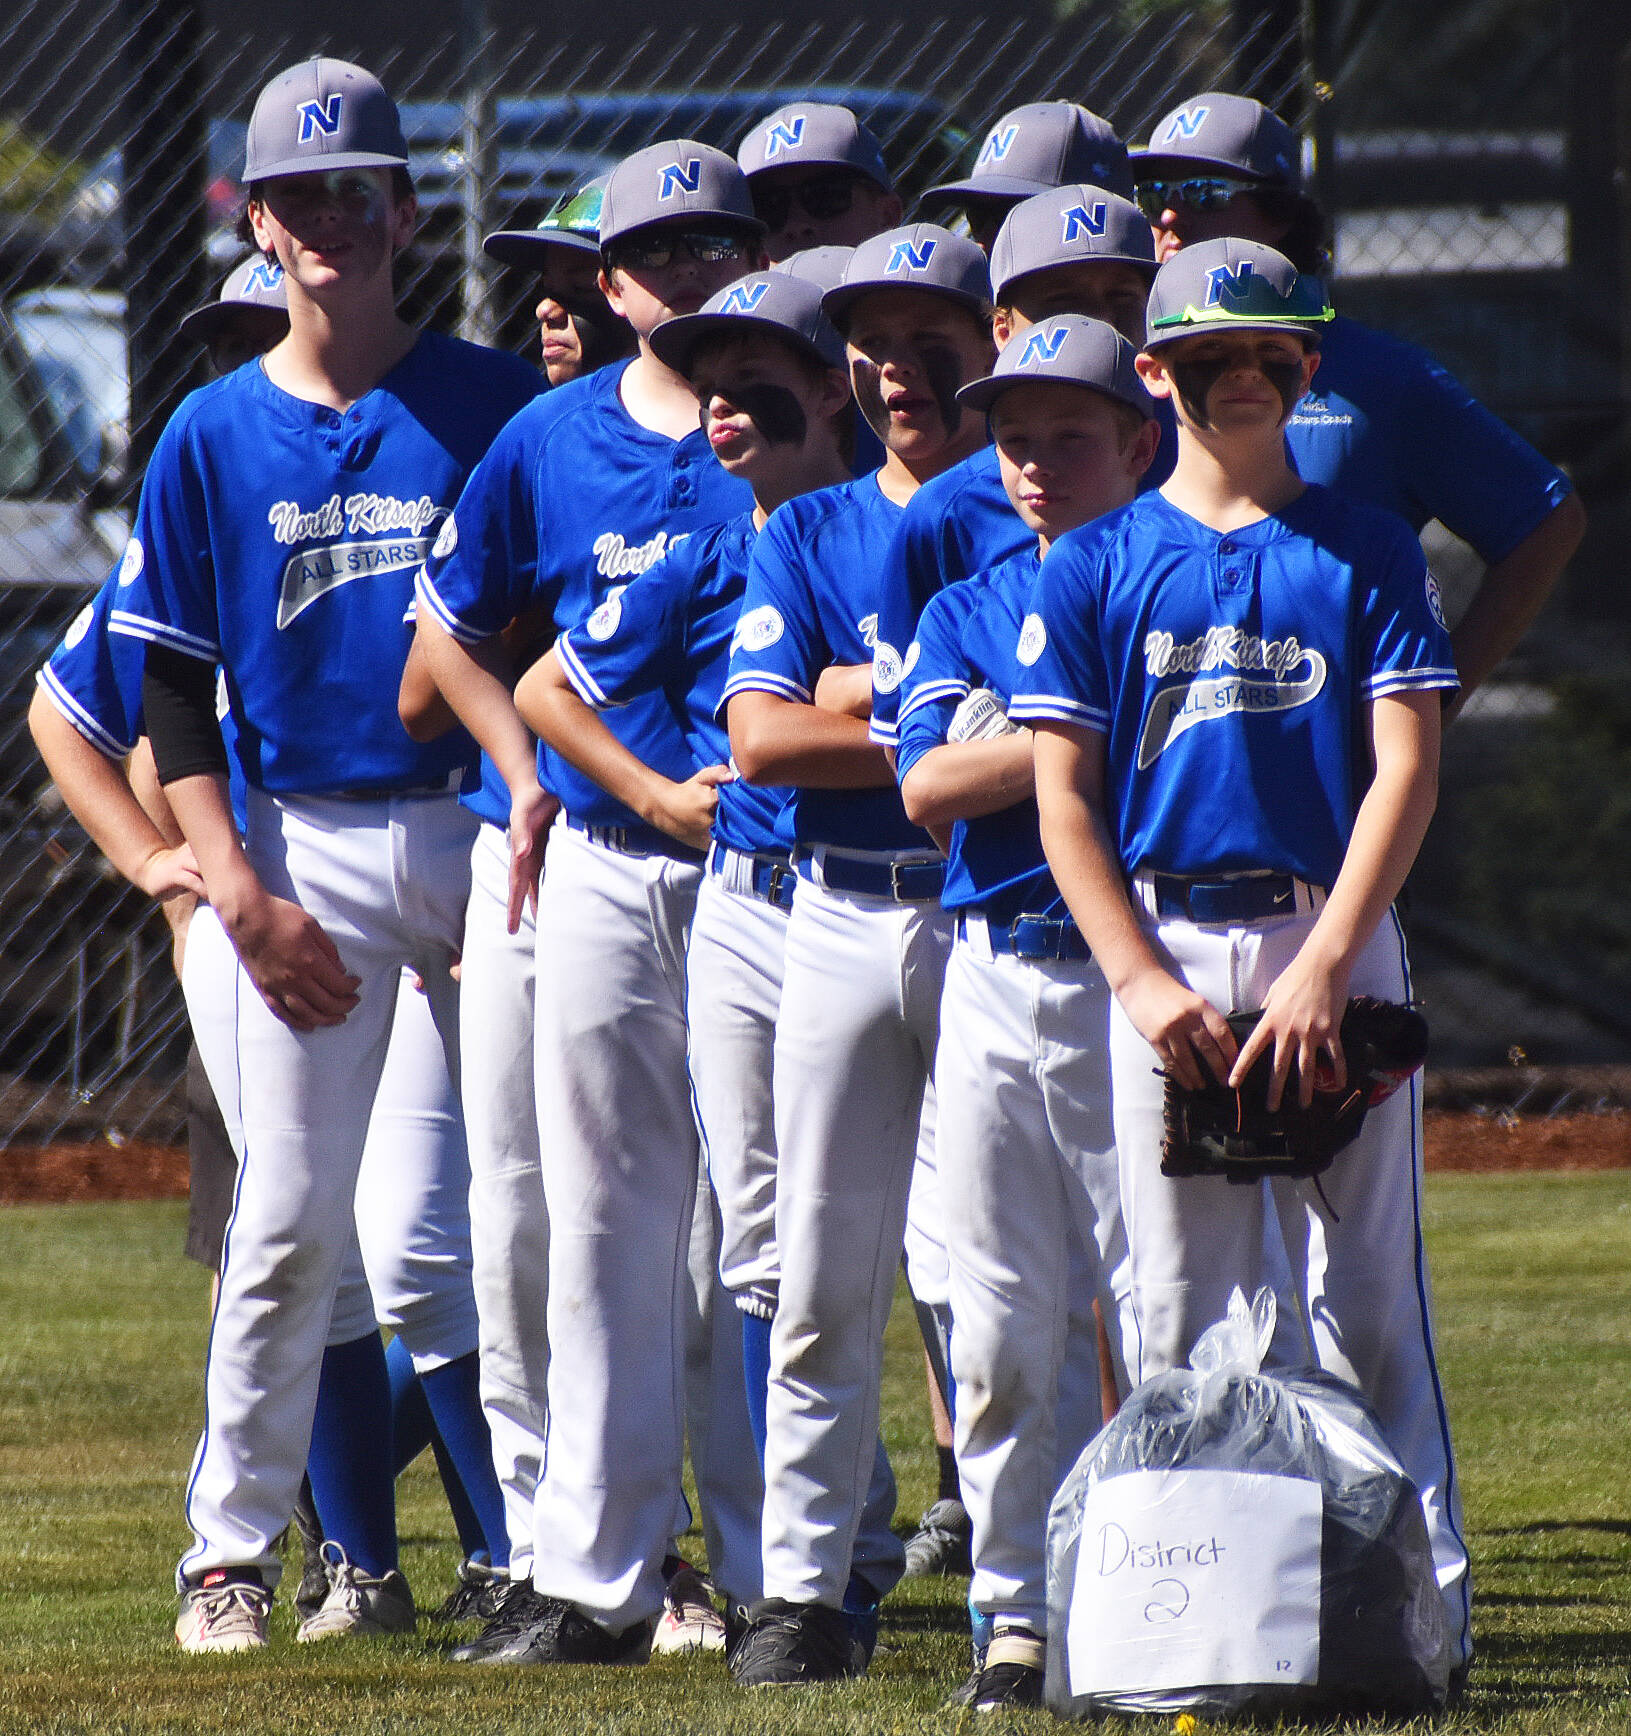 The North Kitsap Little League represents District 2 in the state tournament.